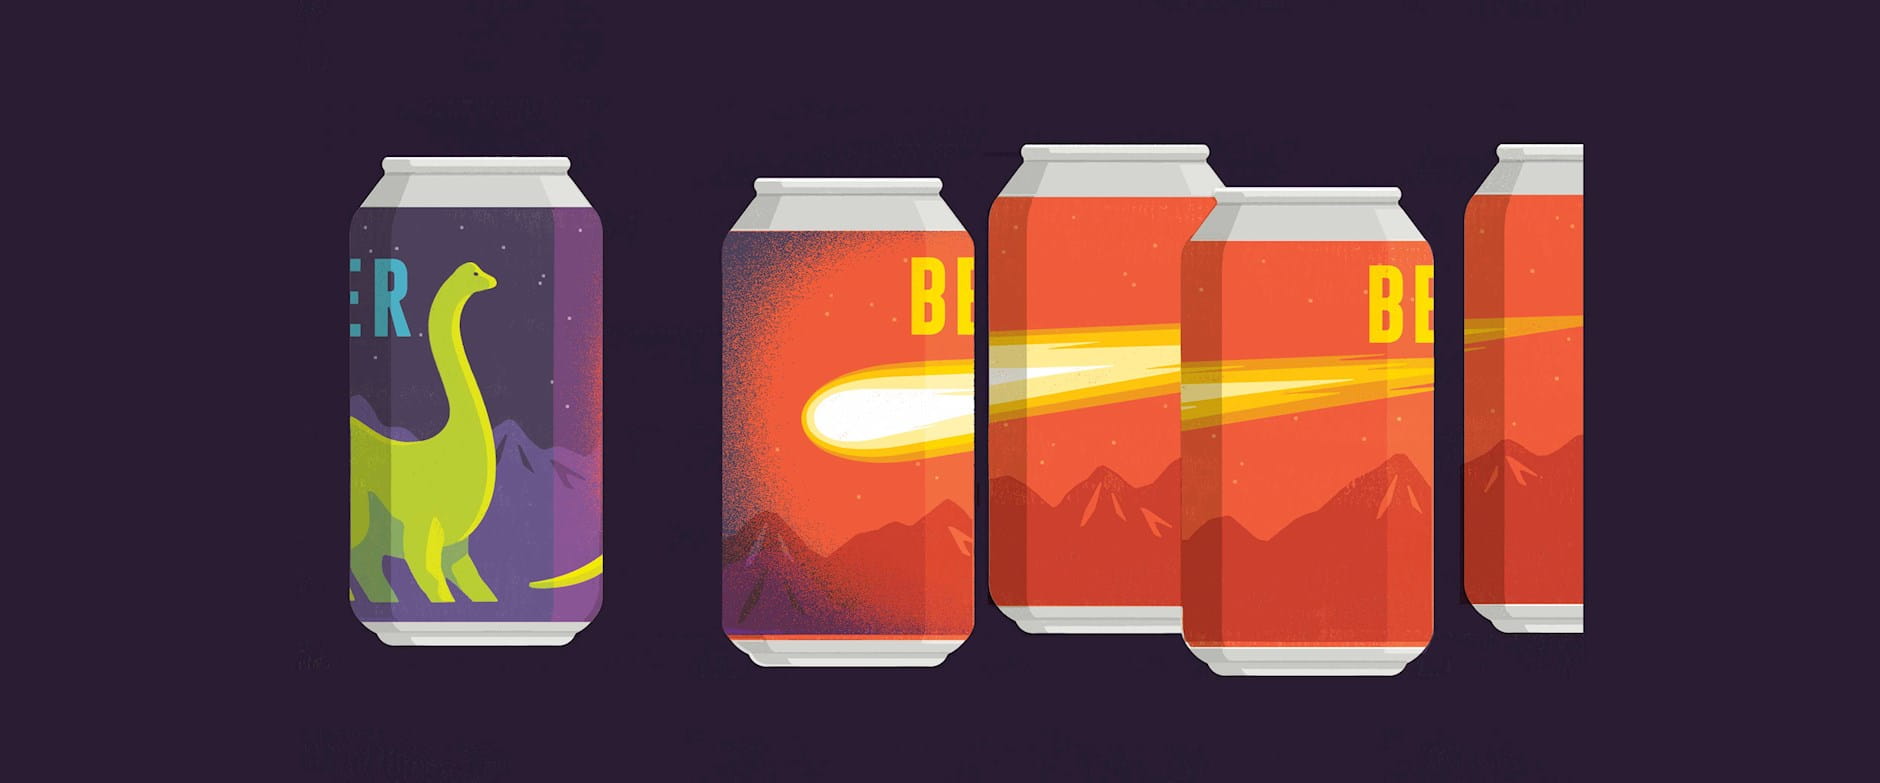 Illustration of cans of beer with labels that show a meteorite hitting dinosaurs on earth